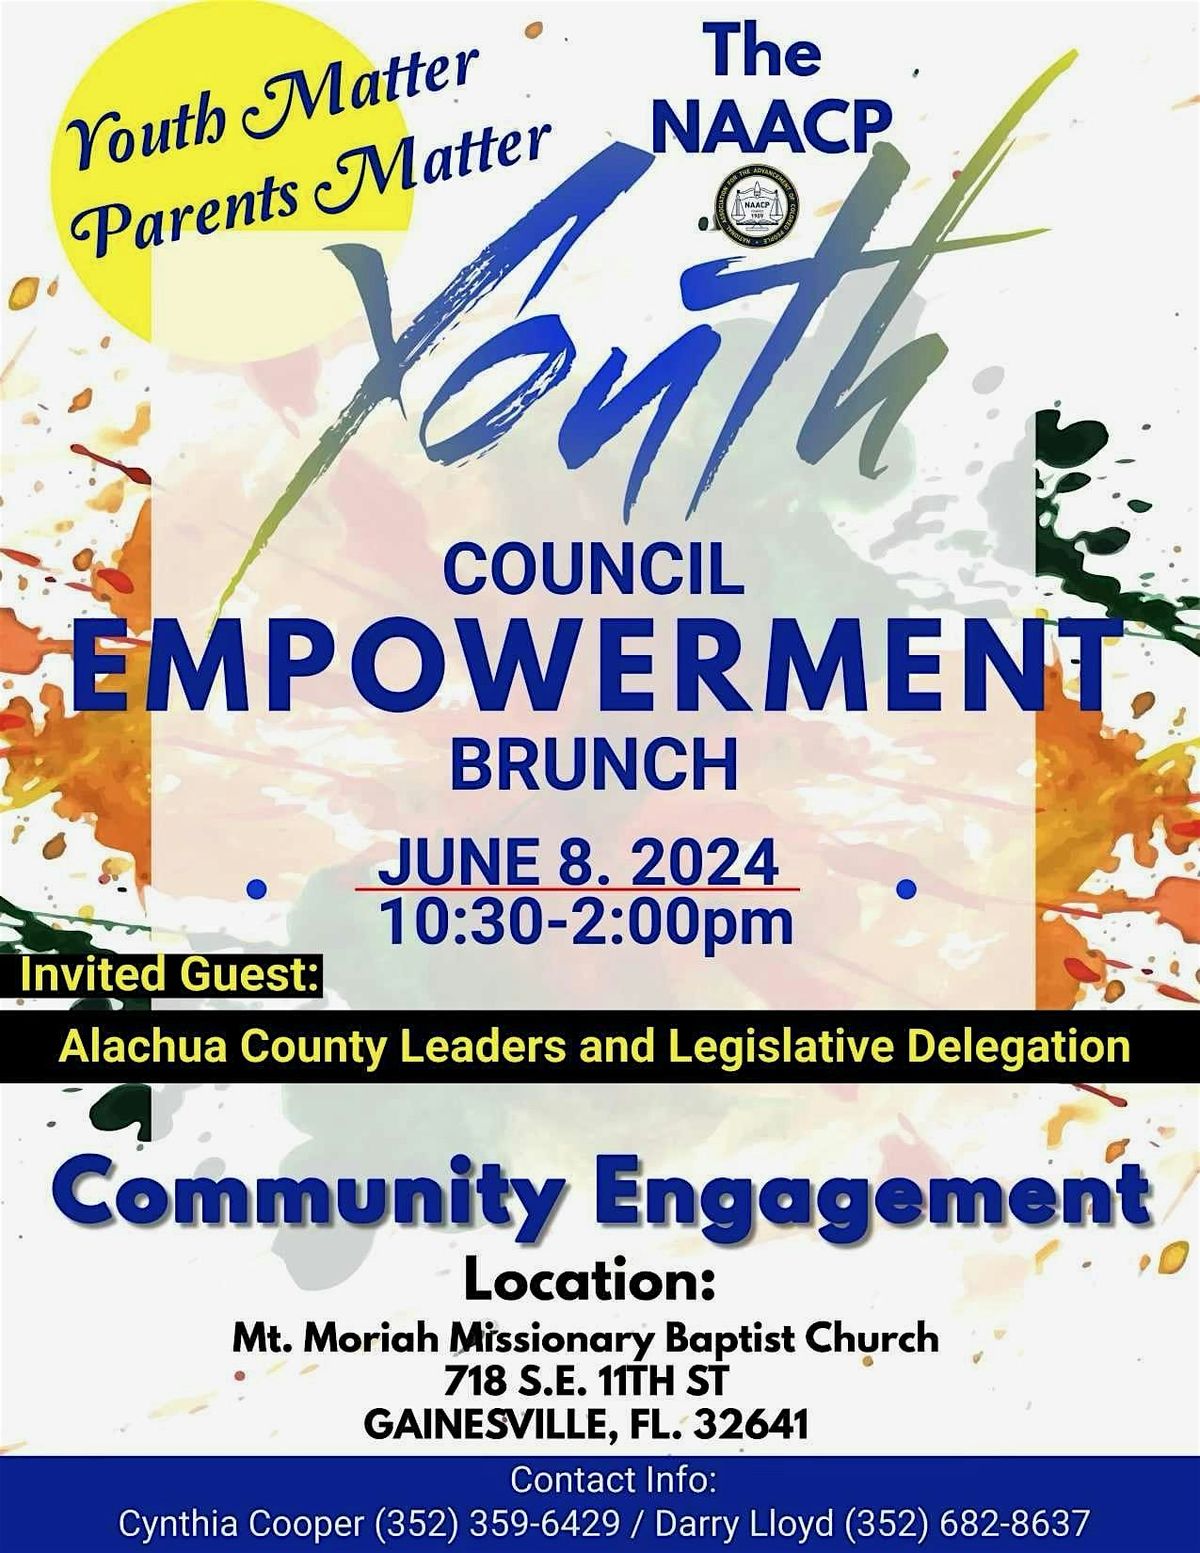 NAACP Youth Empowerment Brunch